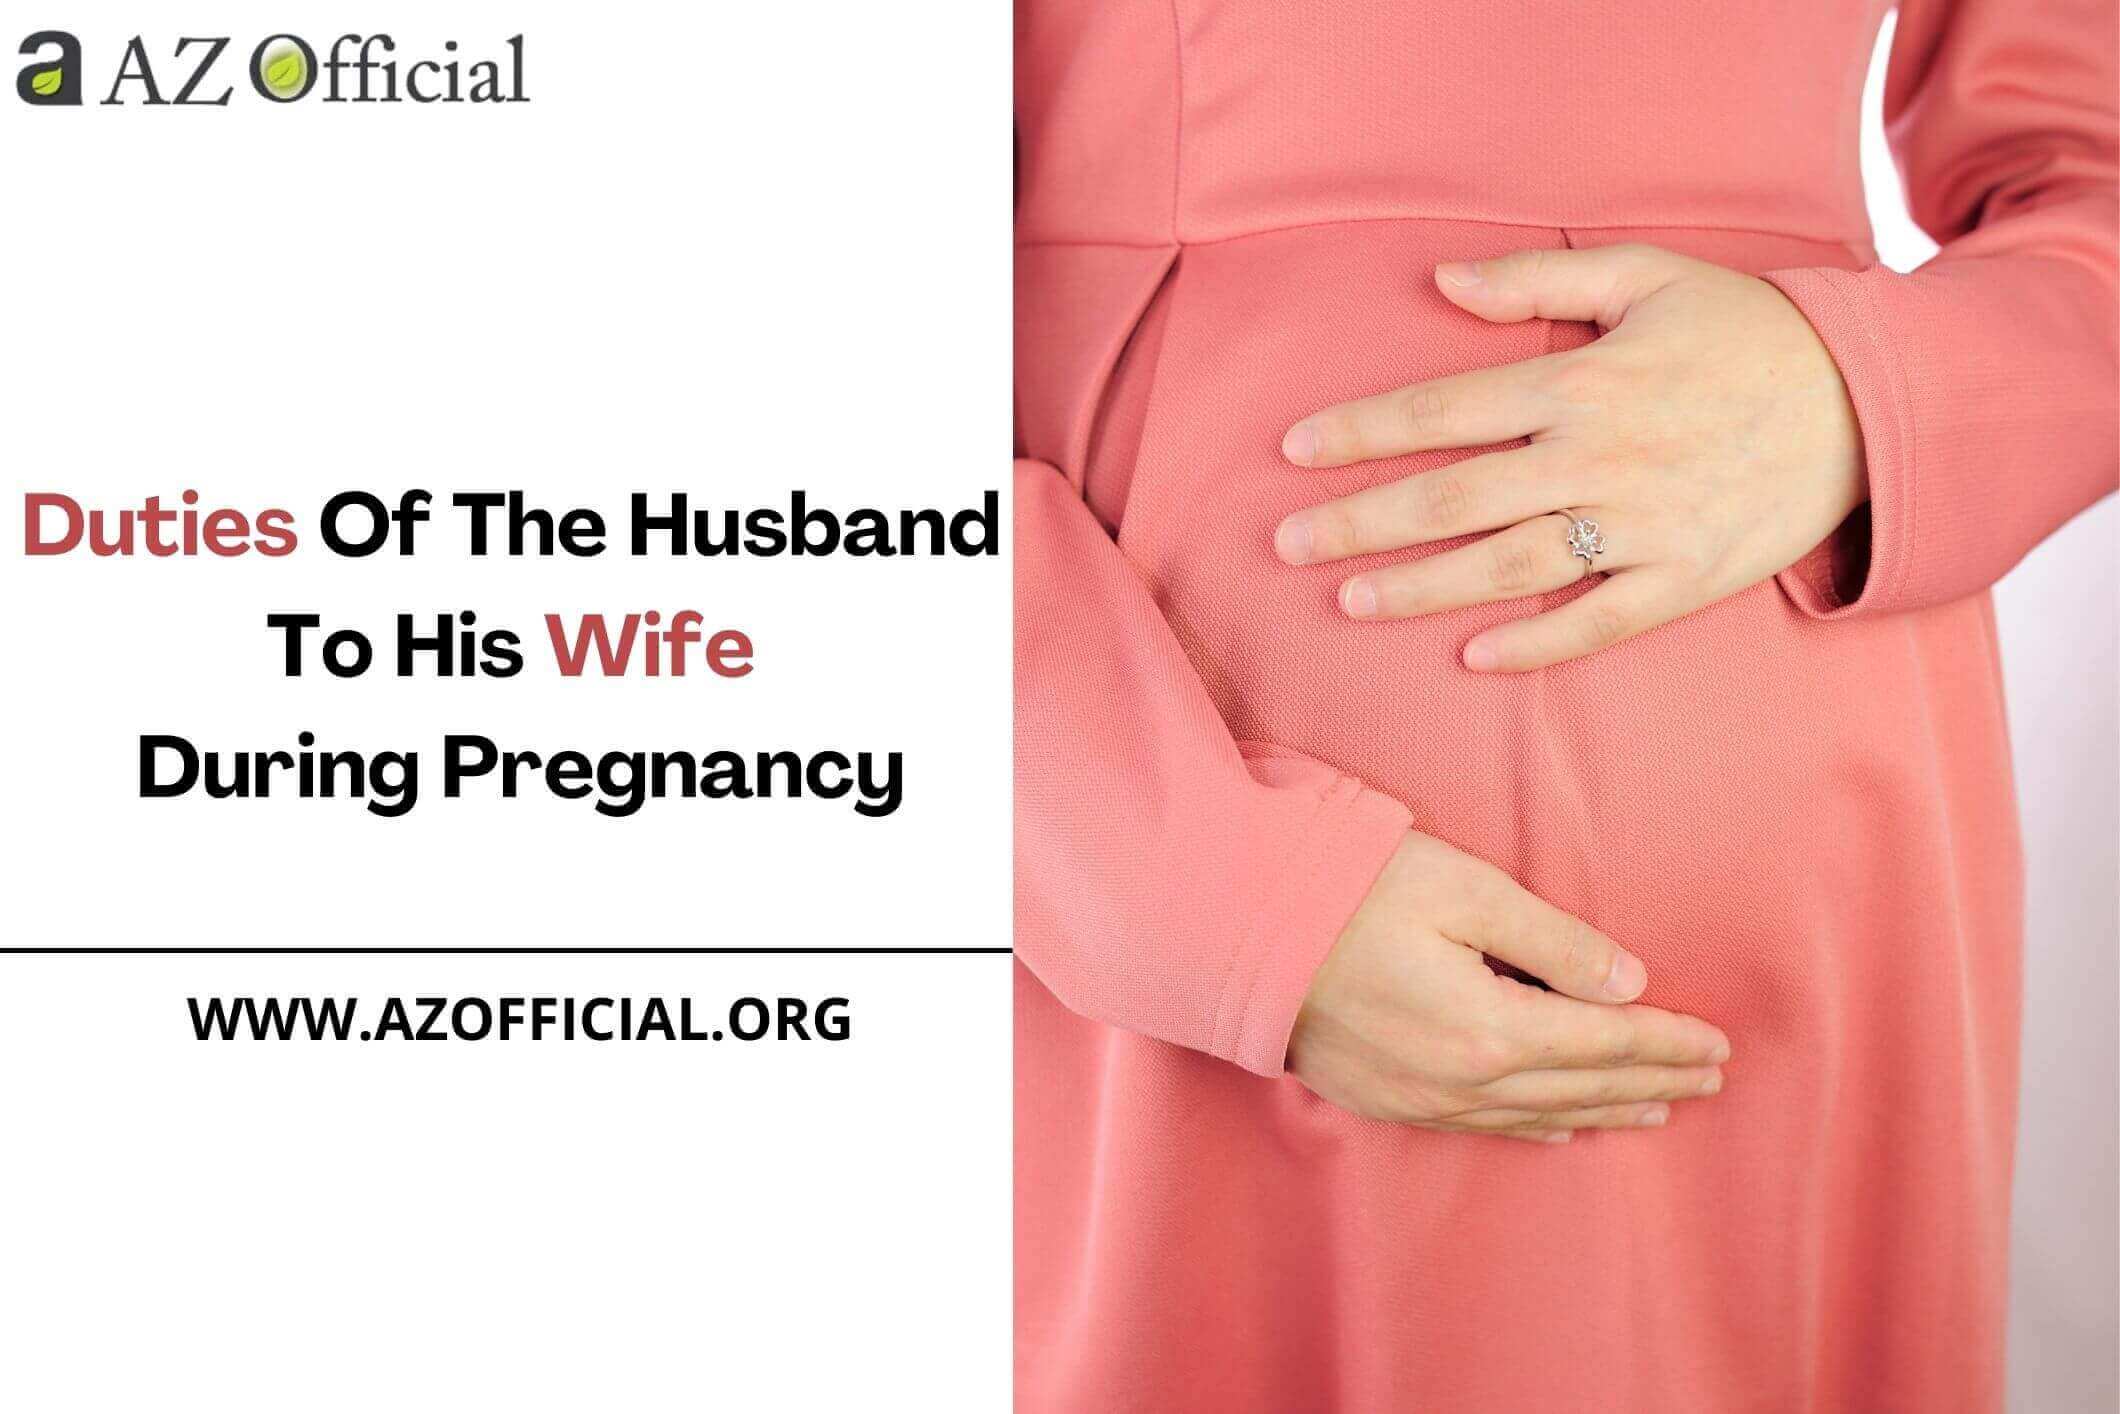 Duties Of The Husband To His Wife During Pregnancy